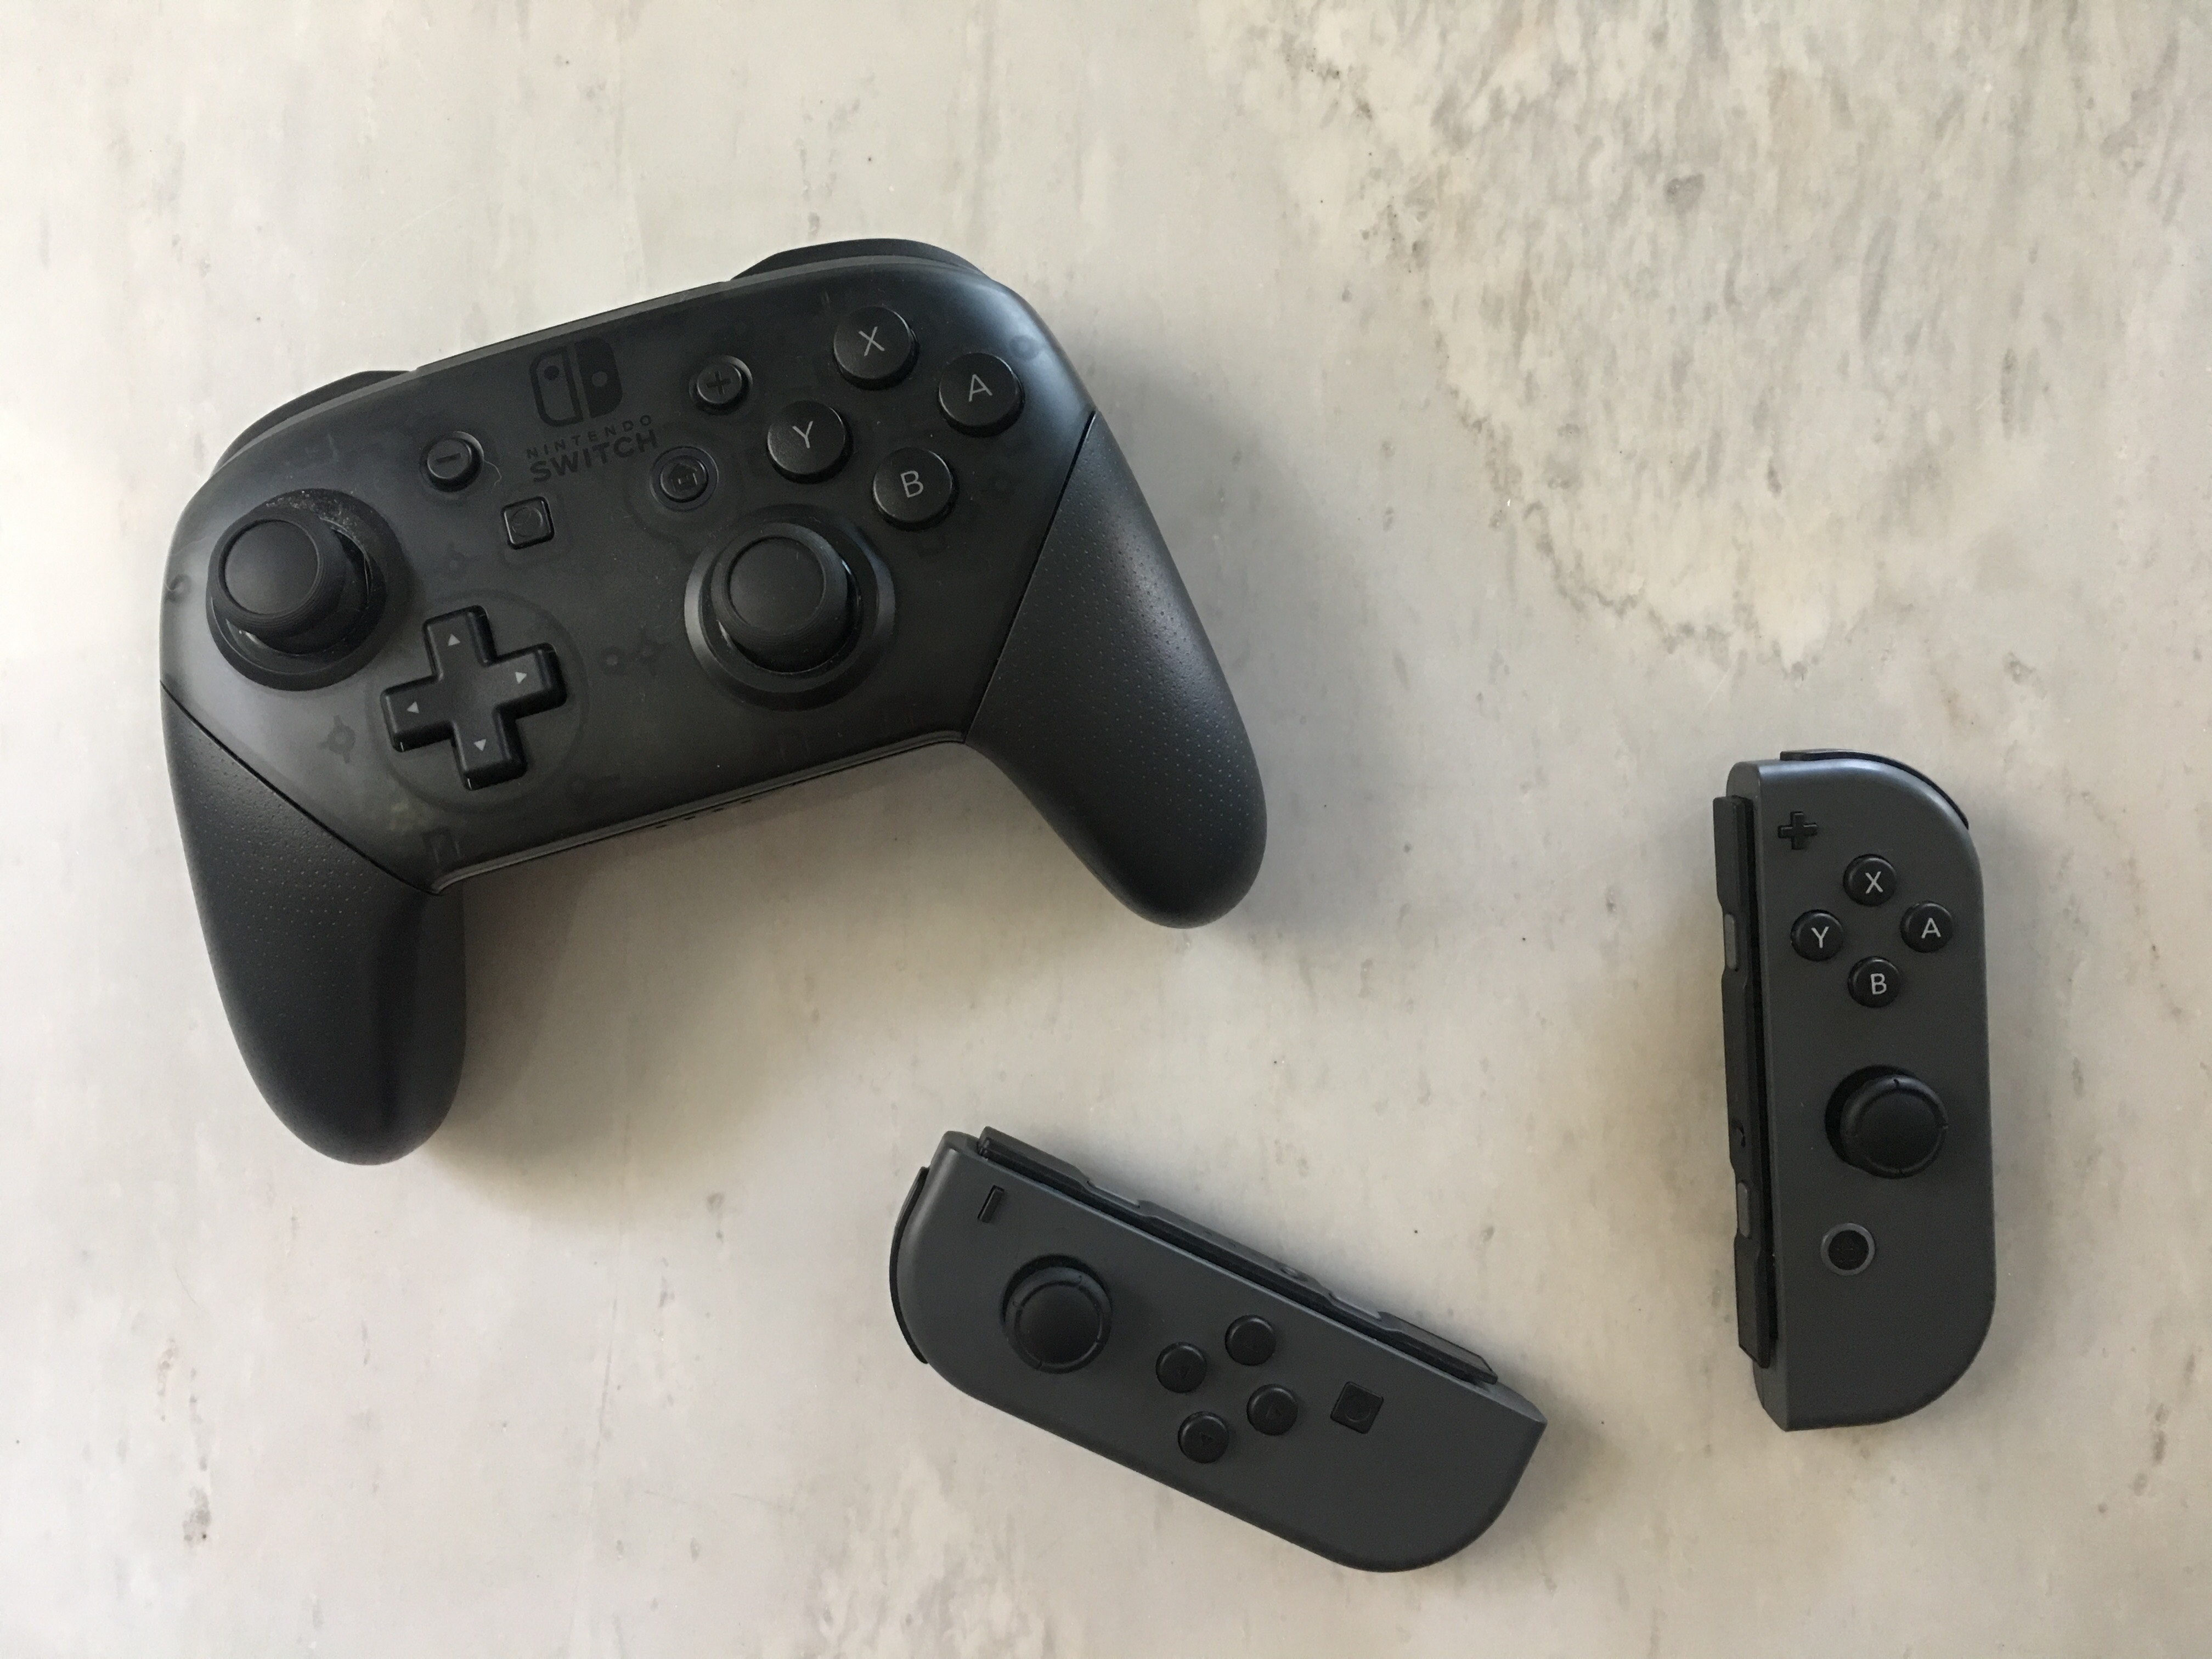 How to Connect a Switch Controller Your PC, | Digital Trends